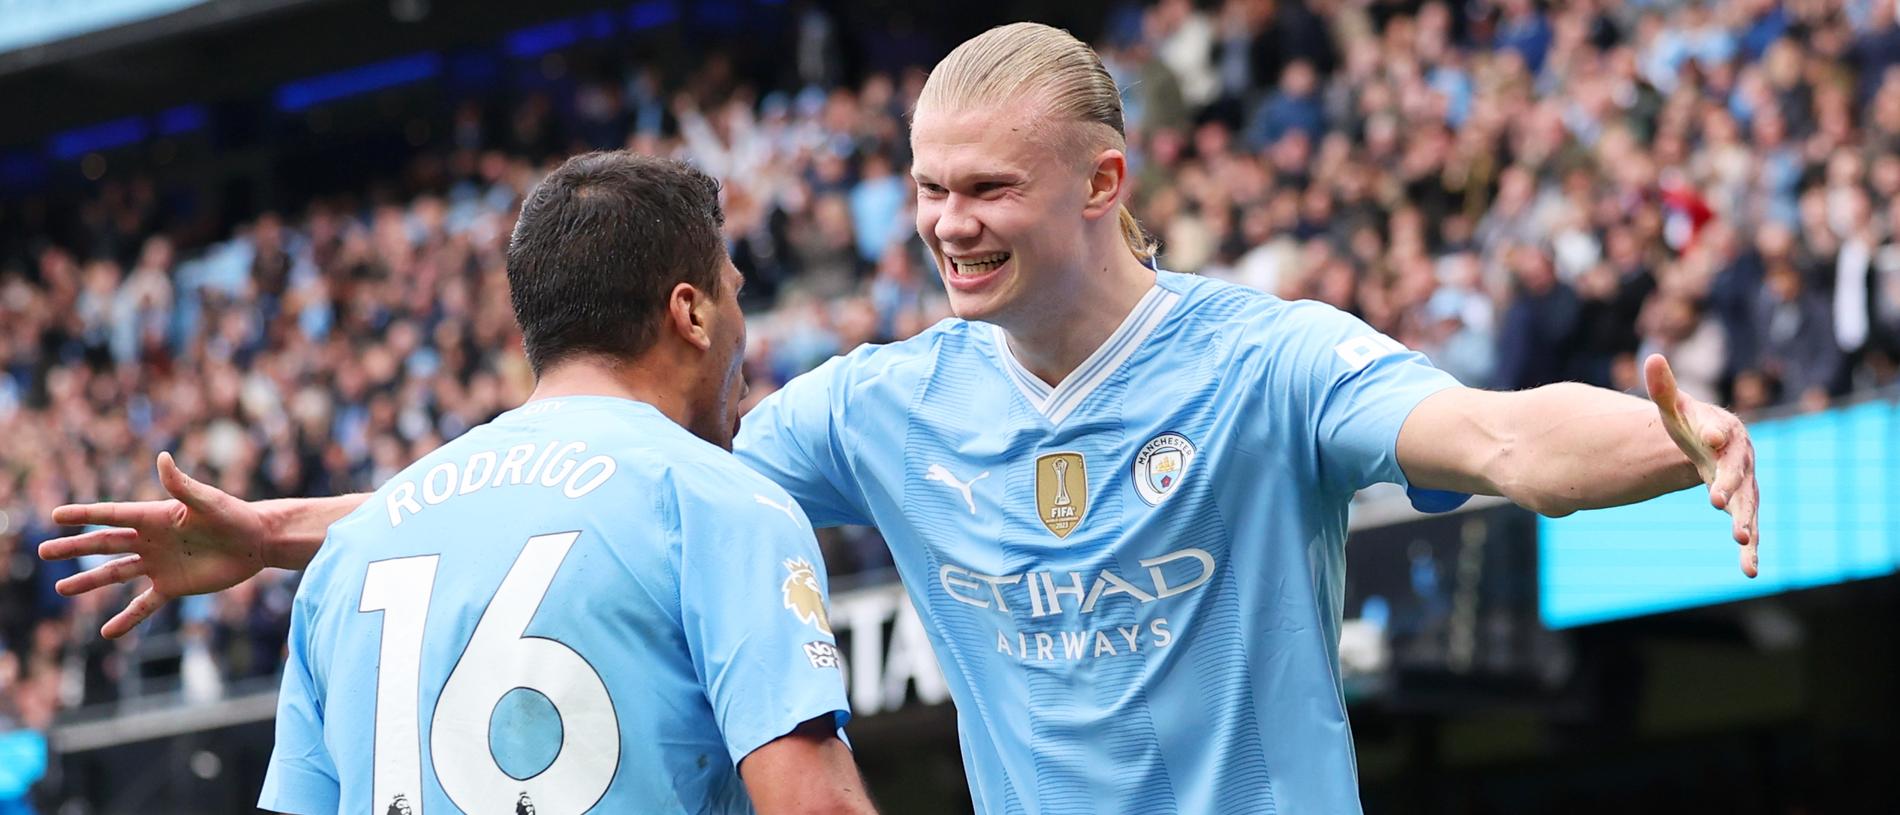 Manchester City are hoping to win a fourth-straight Premier League title. (Photo by Matt McNulty/Getty Images)